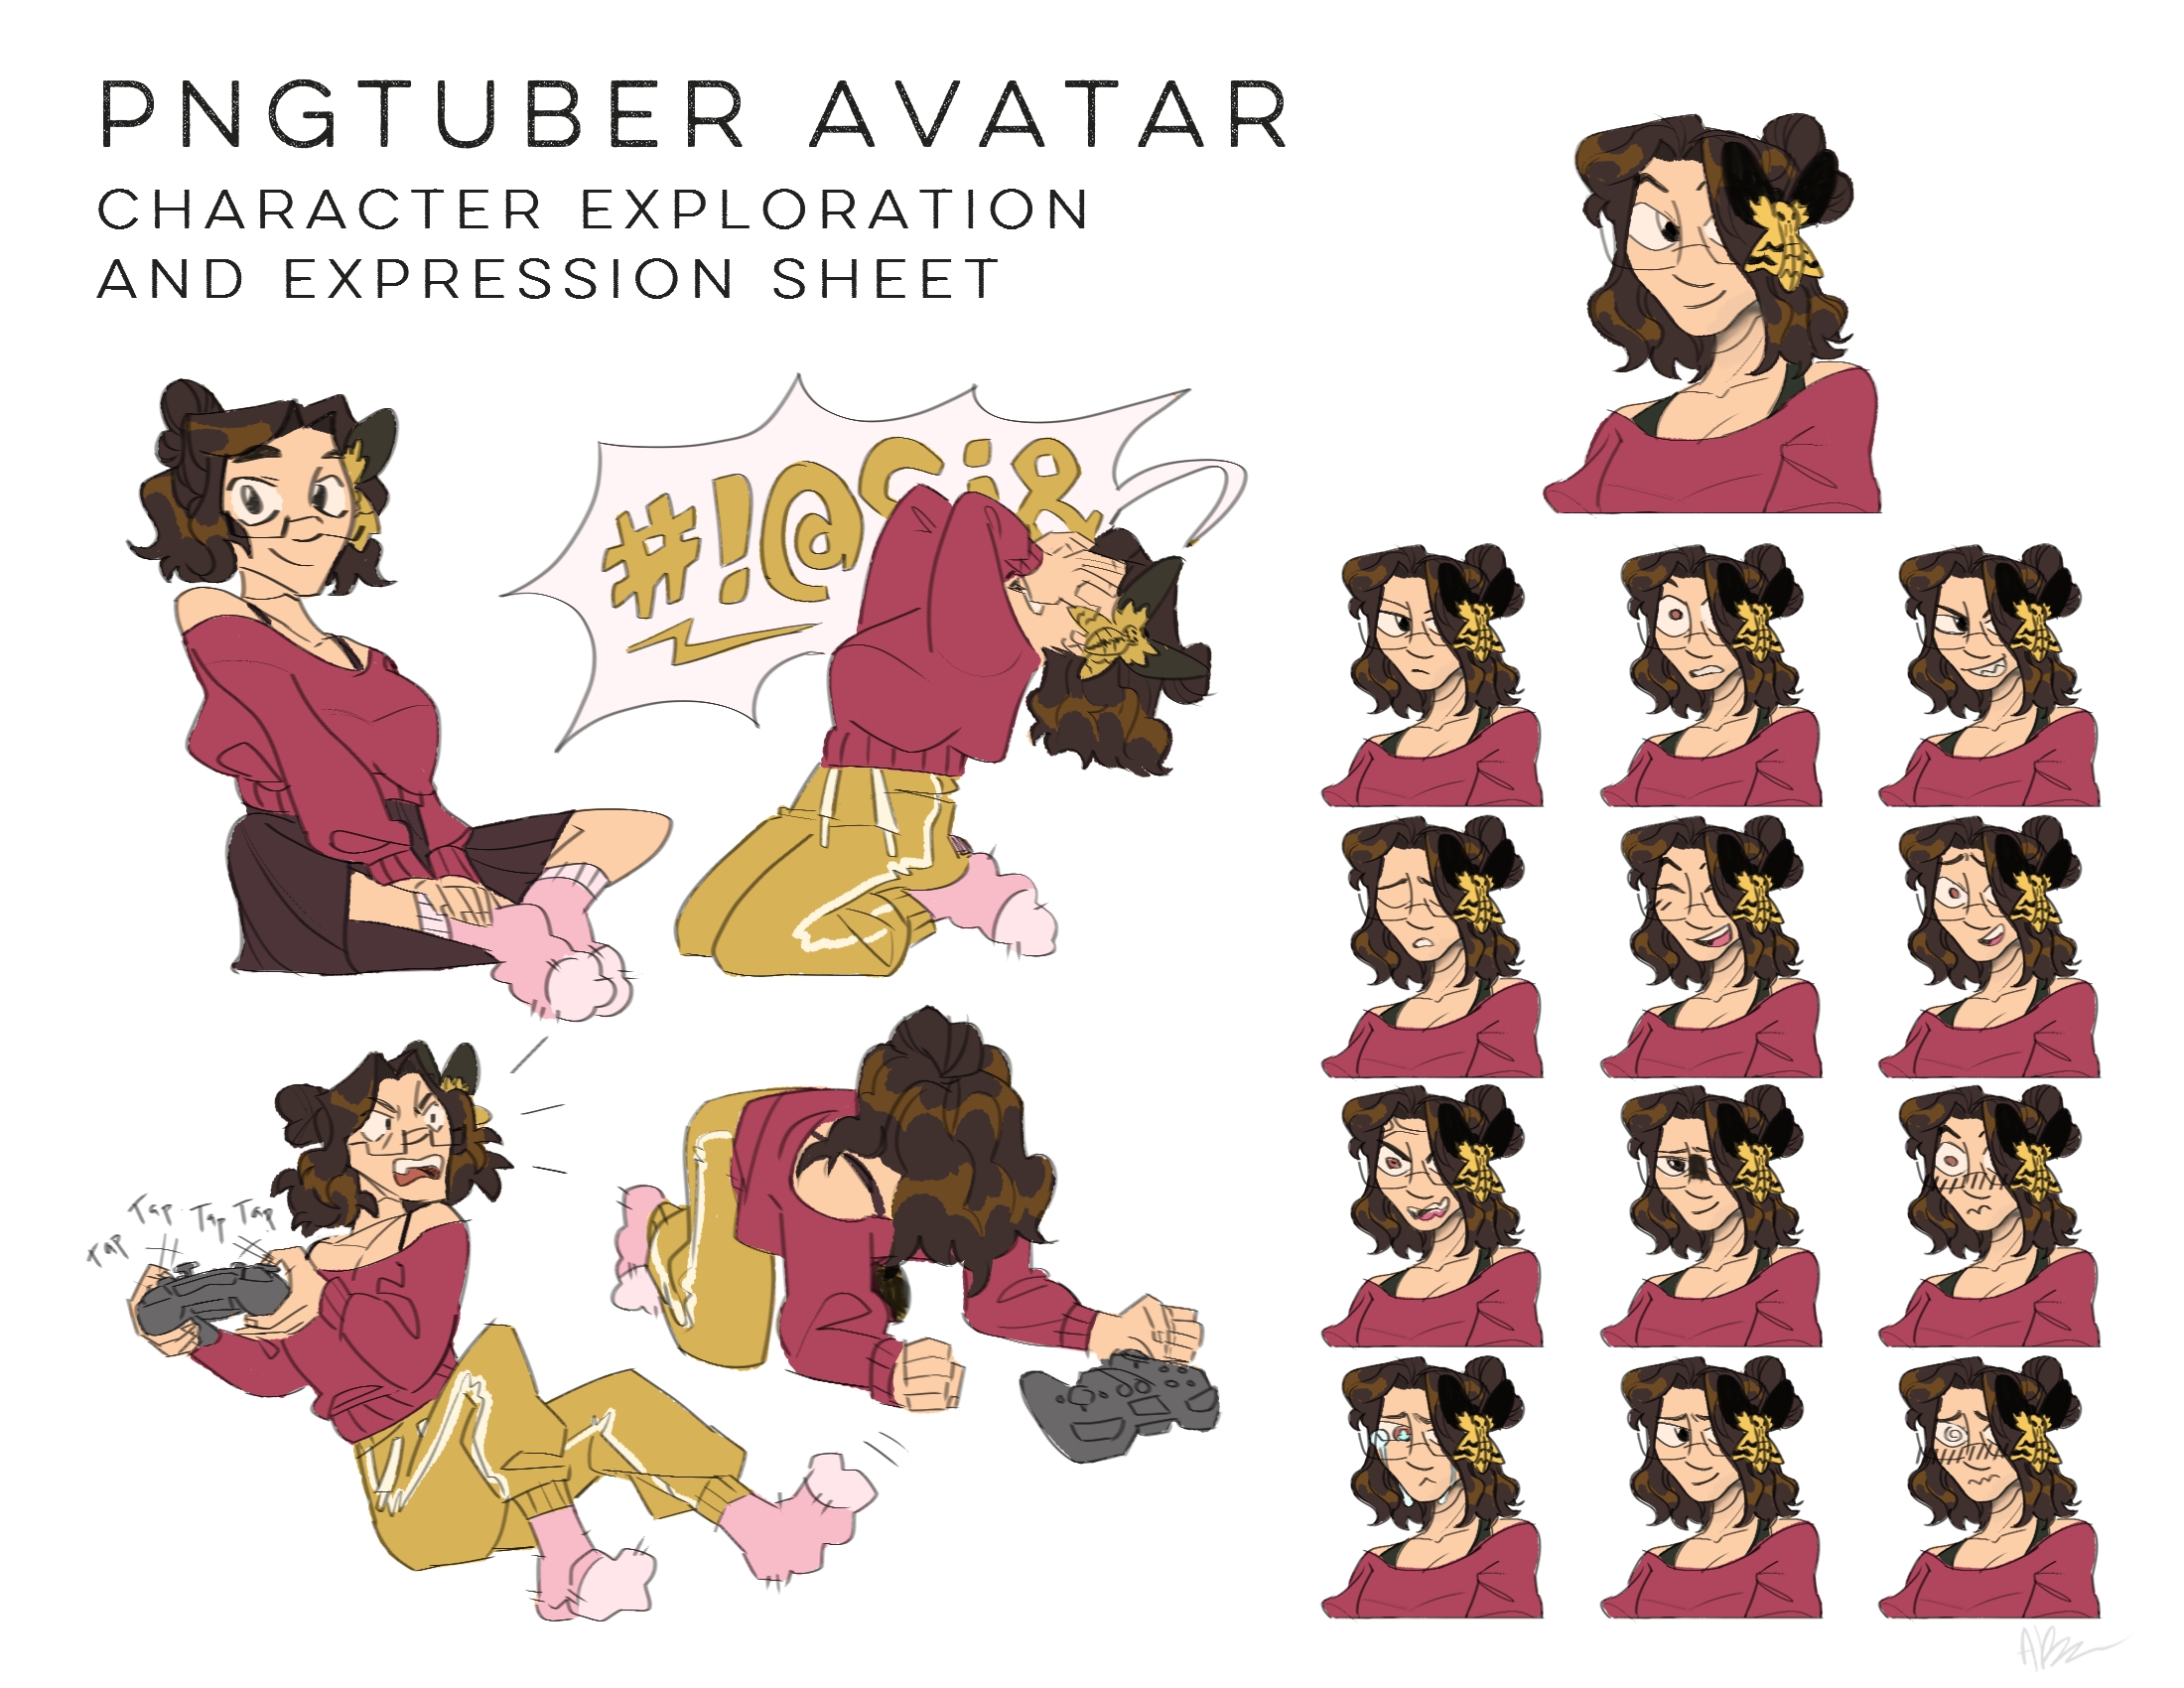 Expression sheet for the png-tuber ''Queen''.